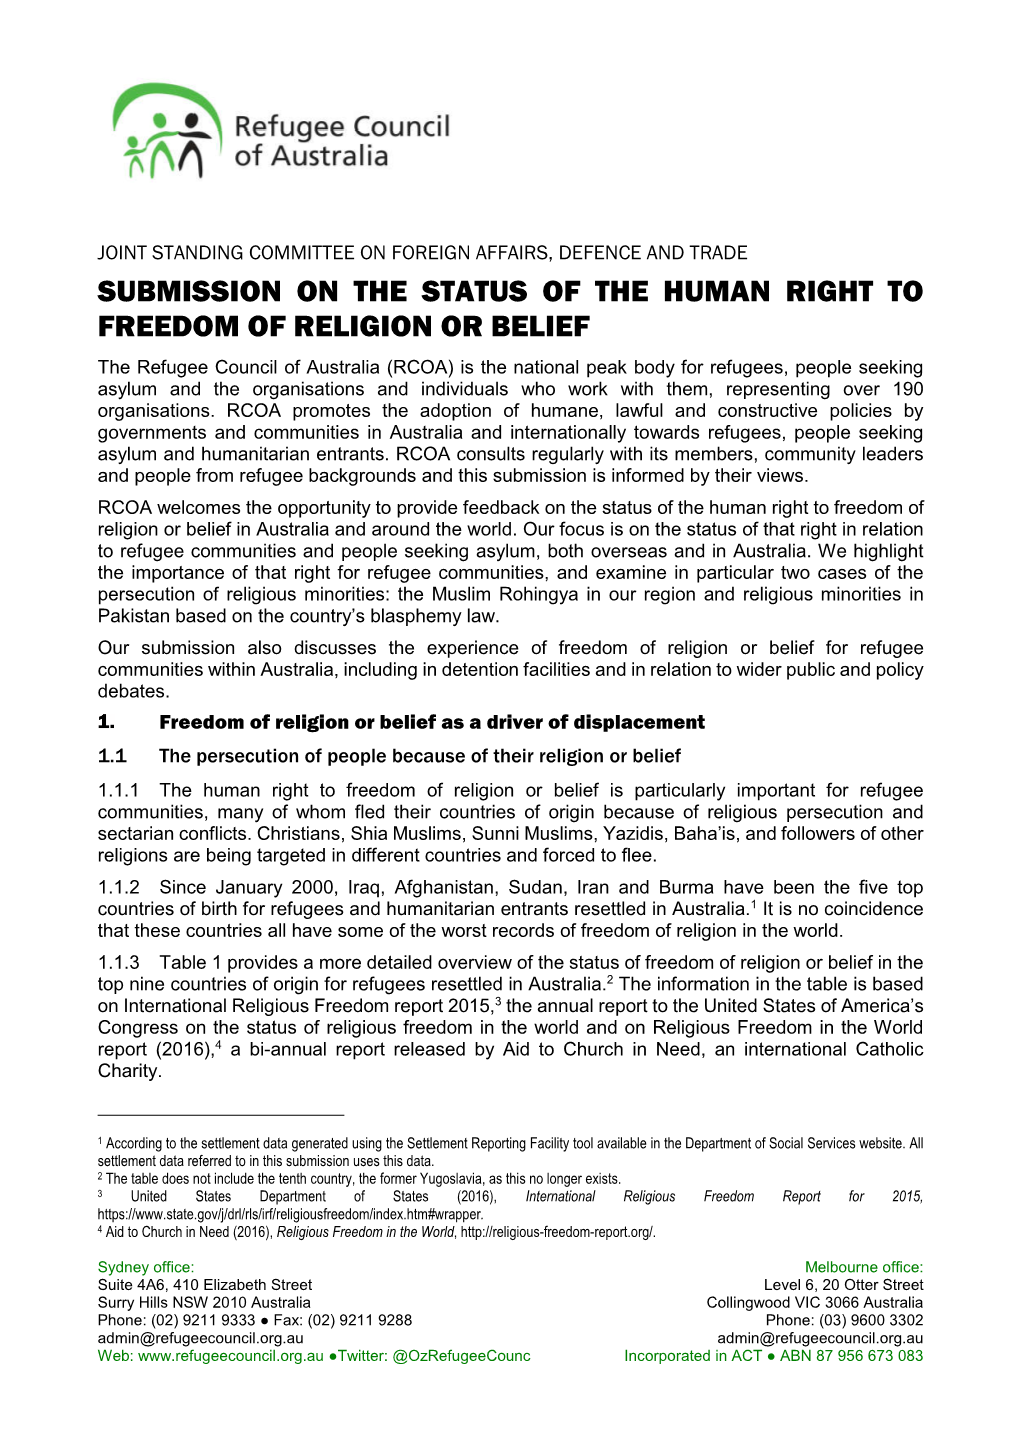 Submission on the Status of the Human Right to Freedom of Religion Or Belief